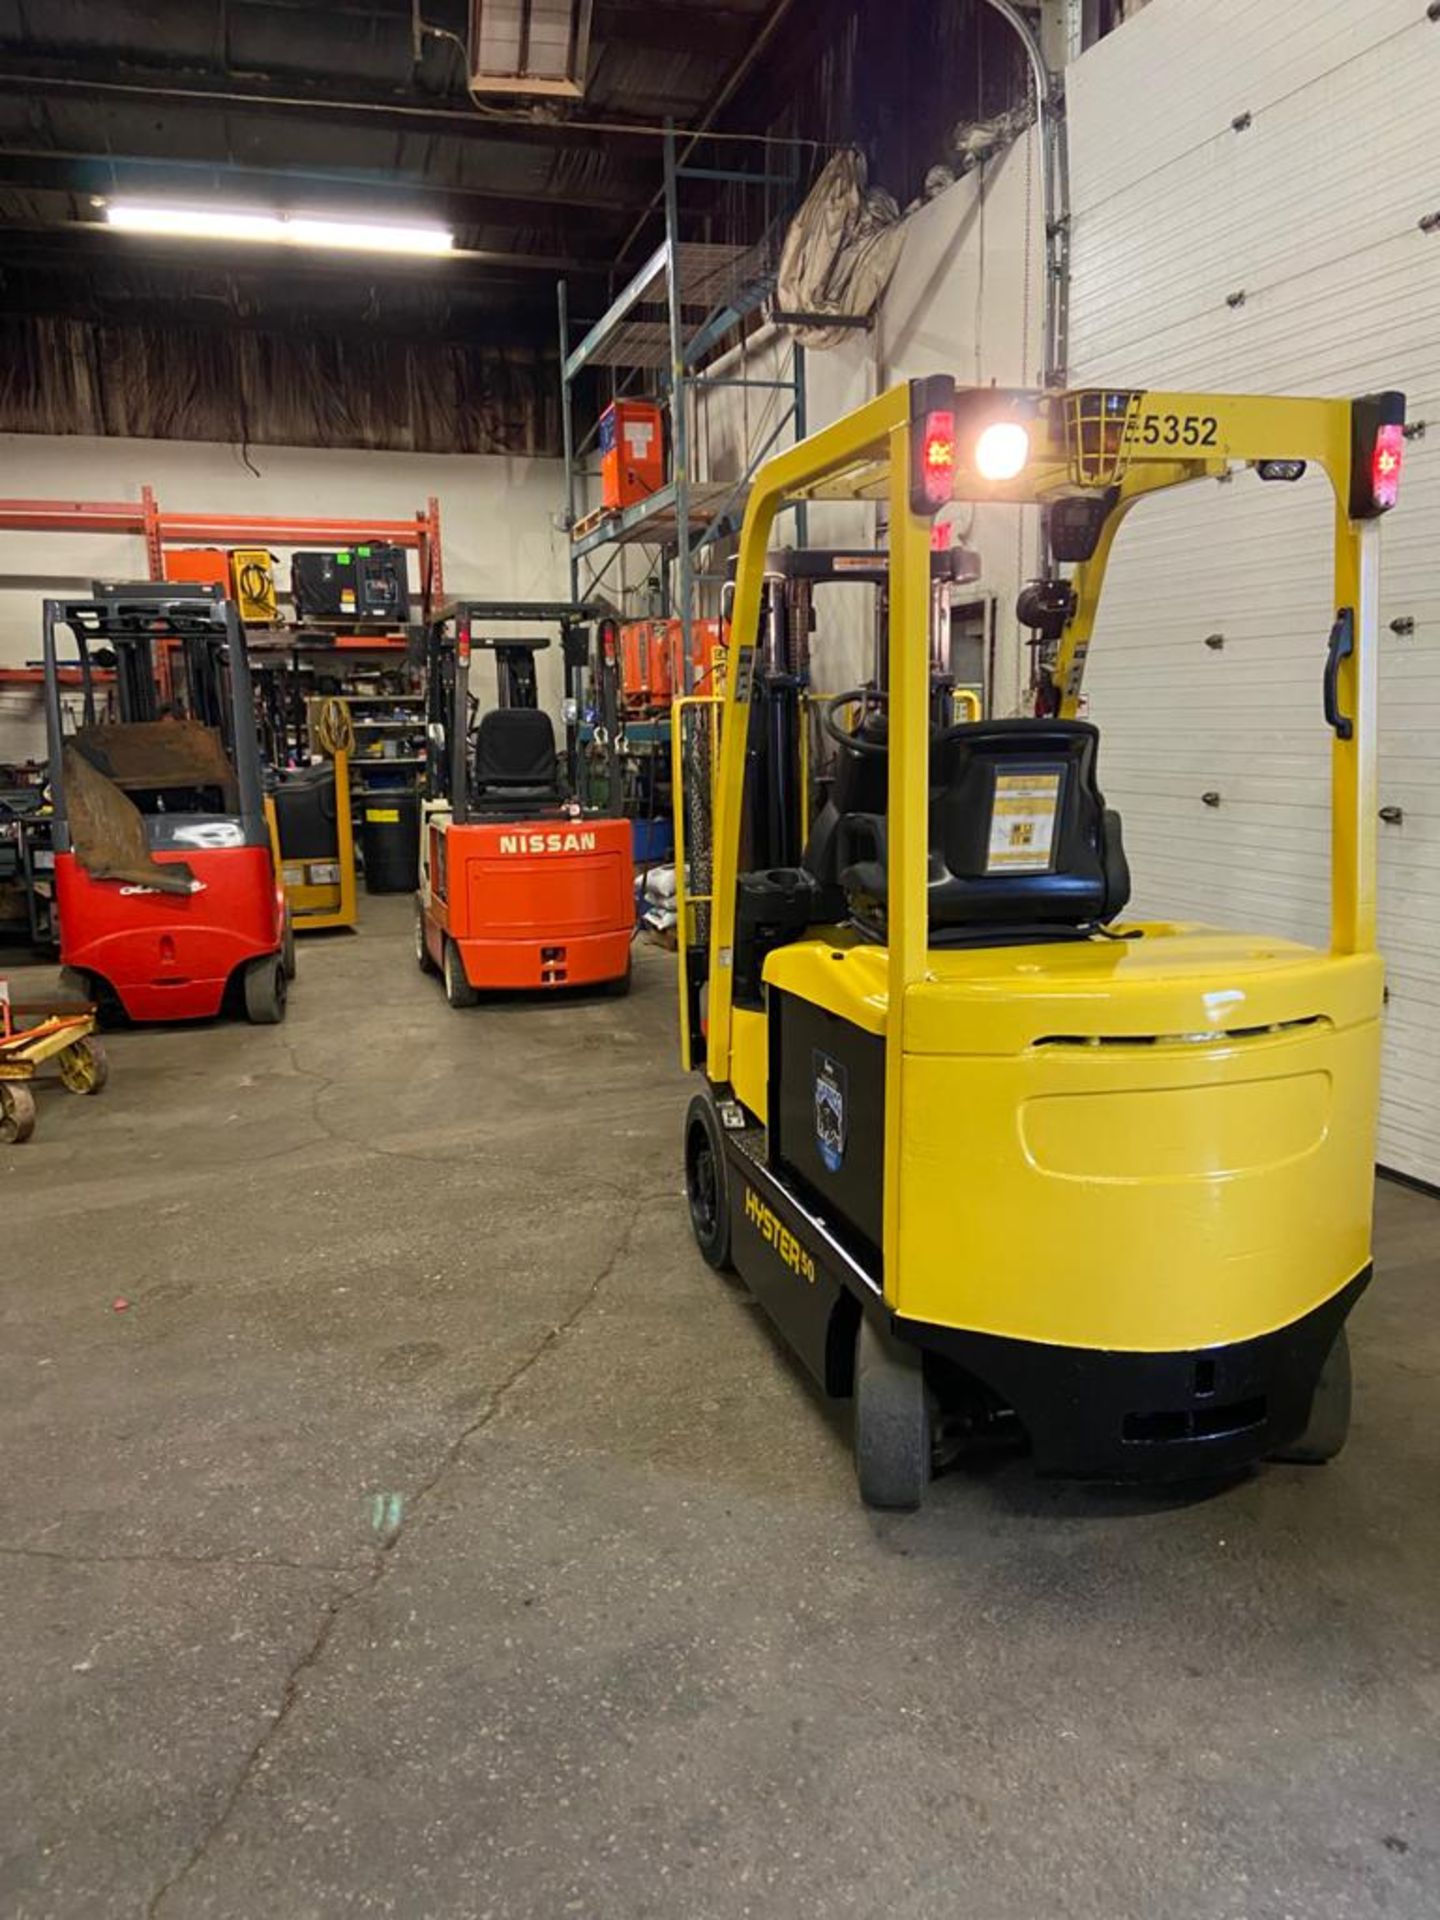 FREE CUSTOMS - 2012 Hyster 5000lbs Capacity Forklift Electric with 3-STAGE MAST with sideshift - Image 3 of 3